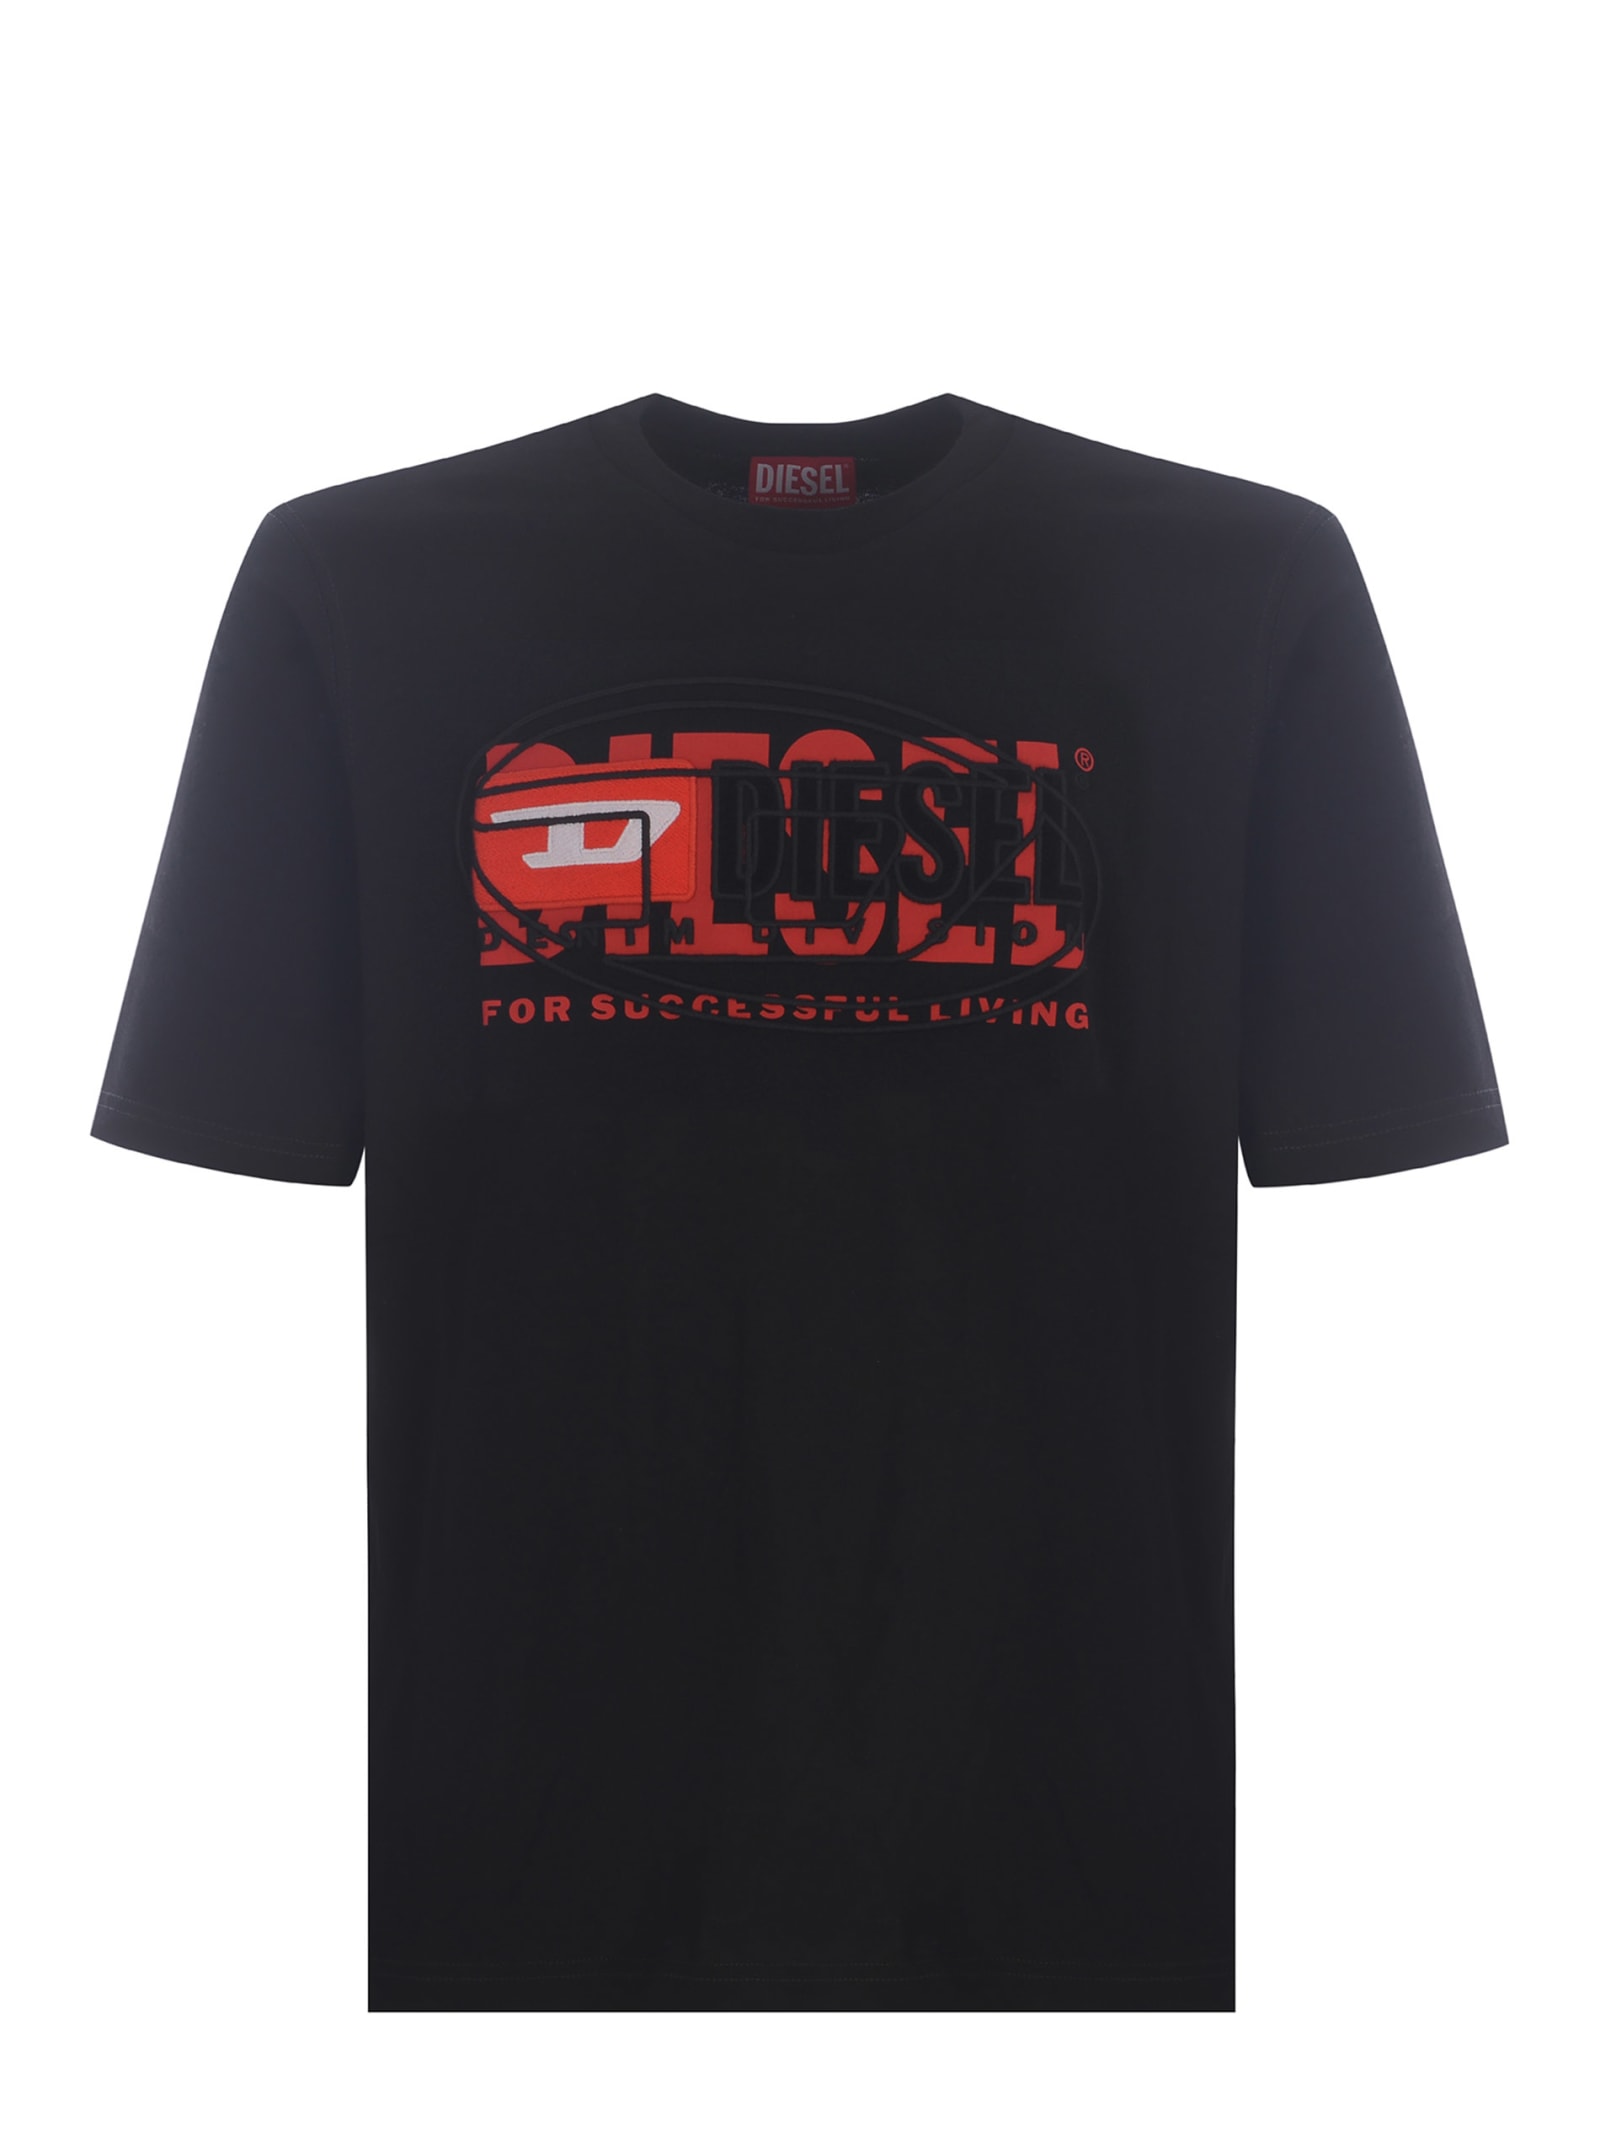 DIESEL T-SHIRT DIESEL T-BOXT MADE OF COTTON JERSEY